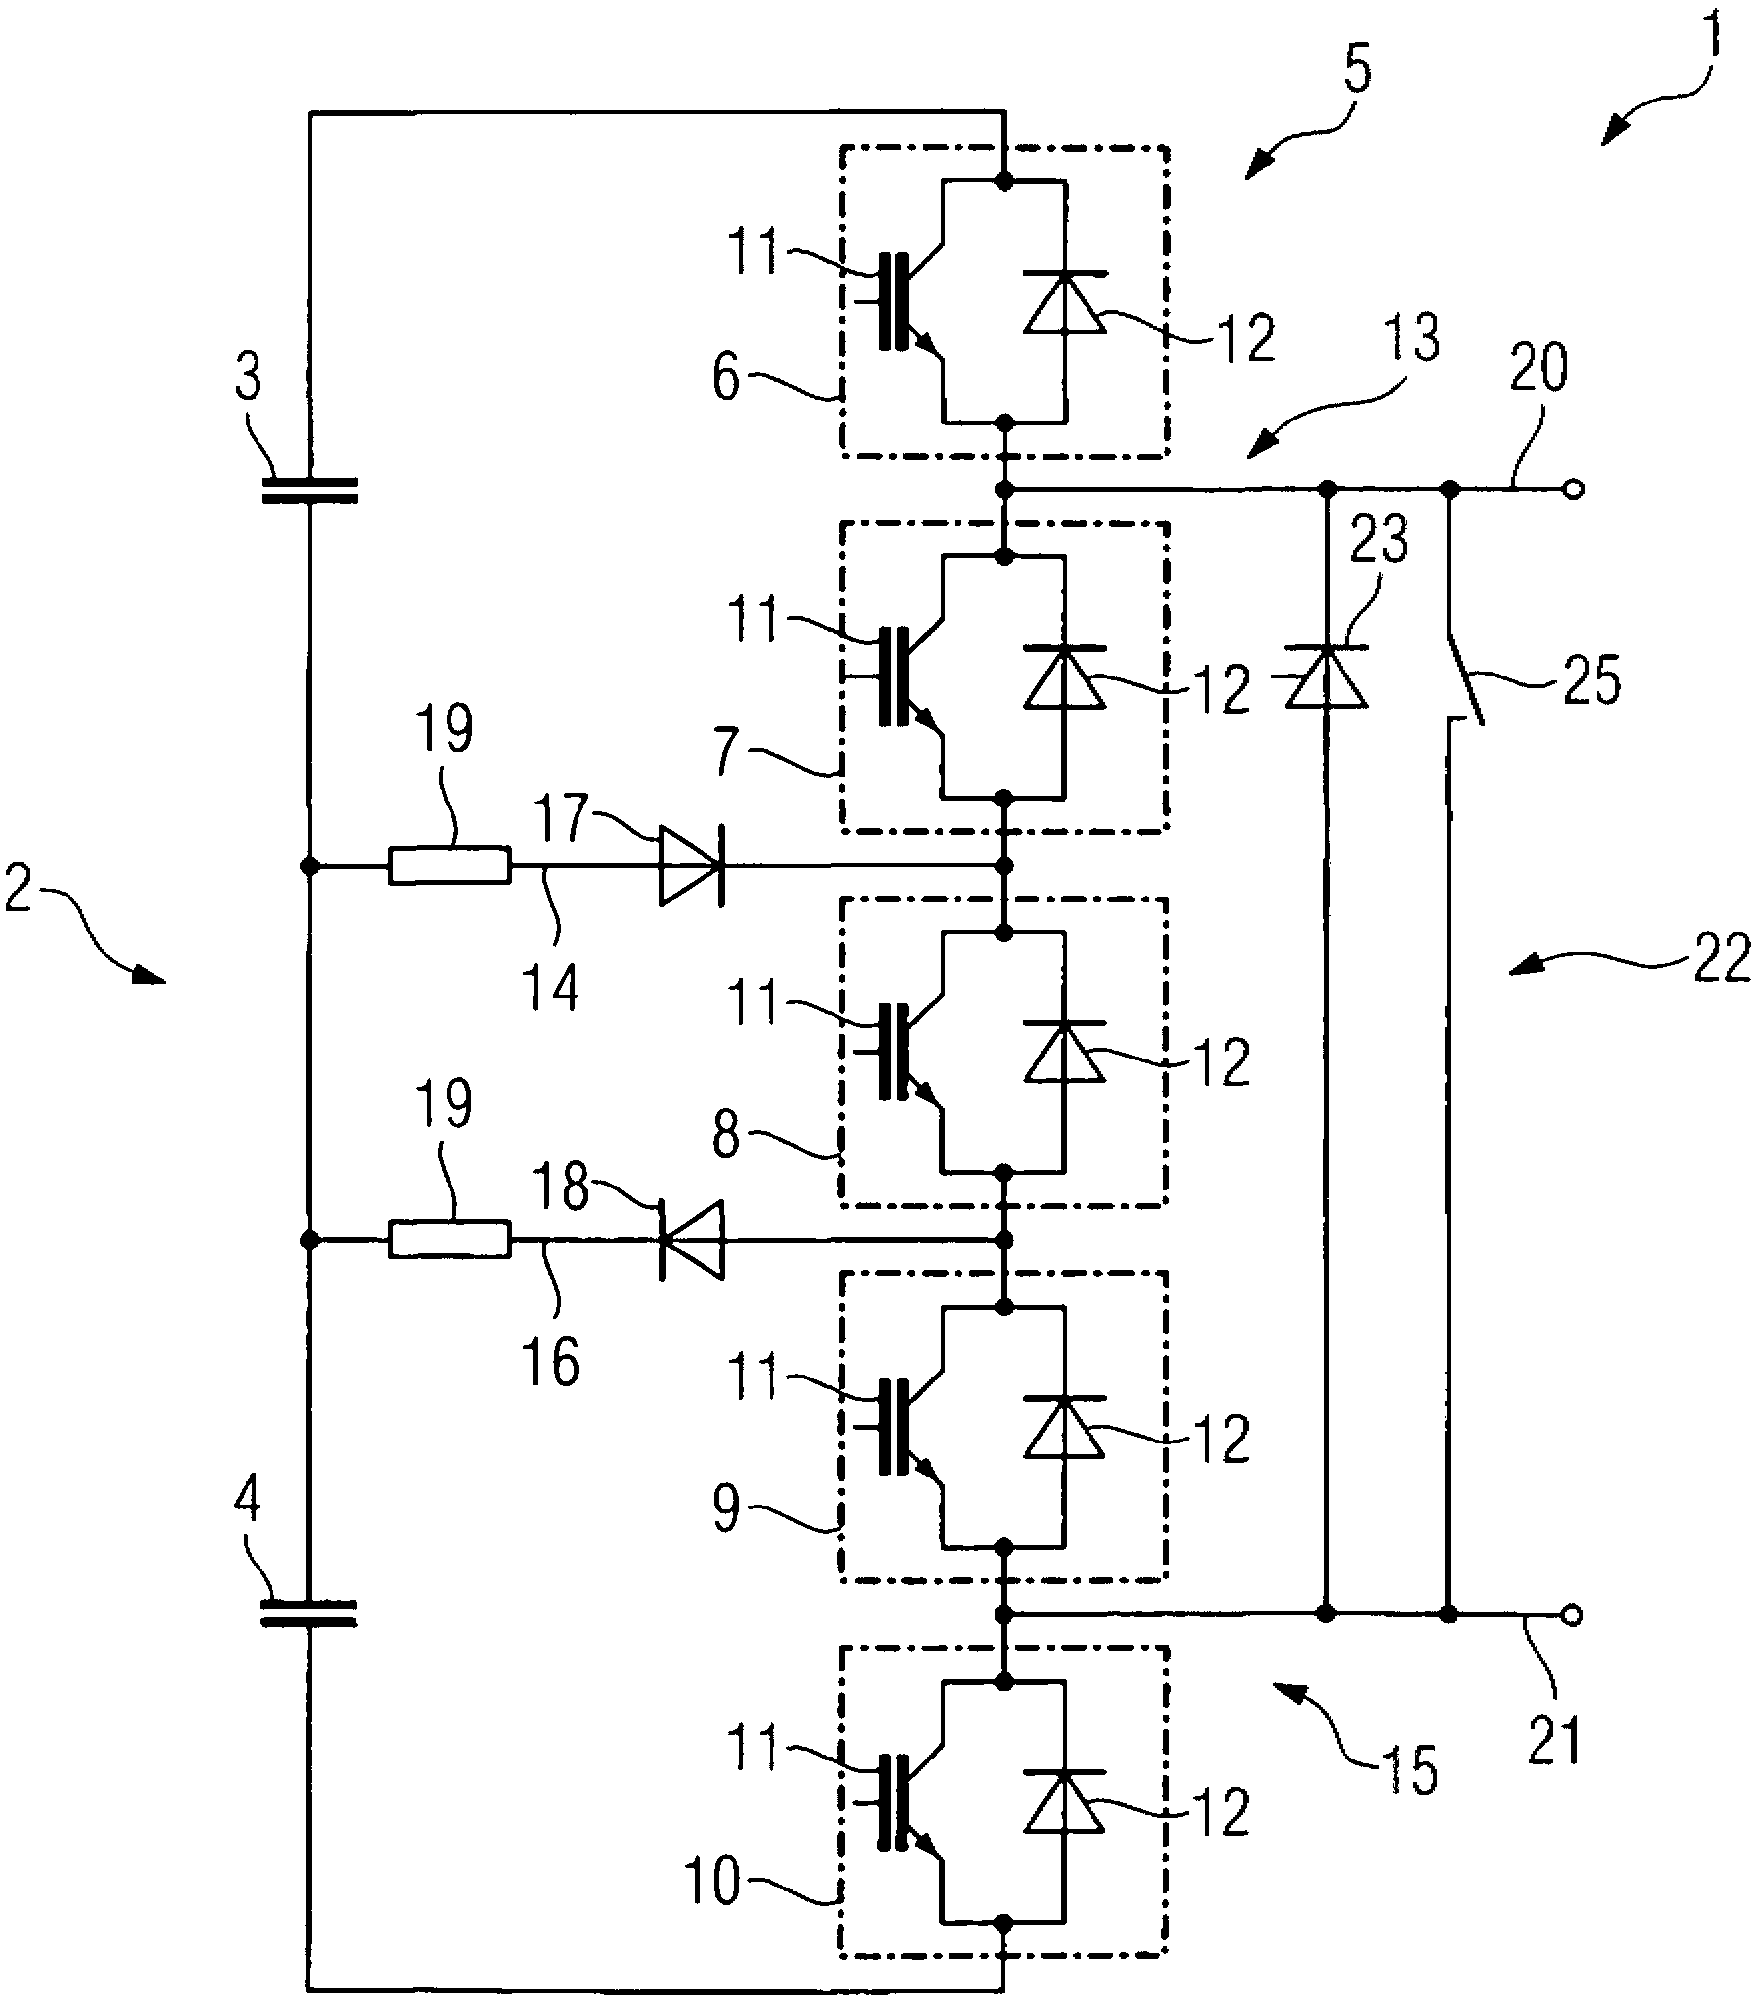 Double module for modular multi-stage converter